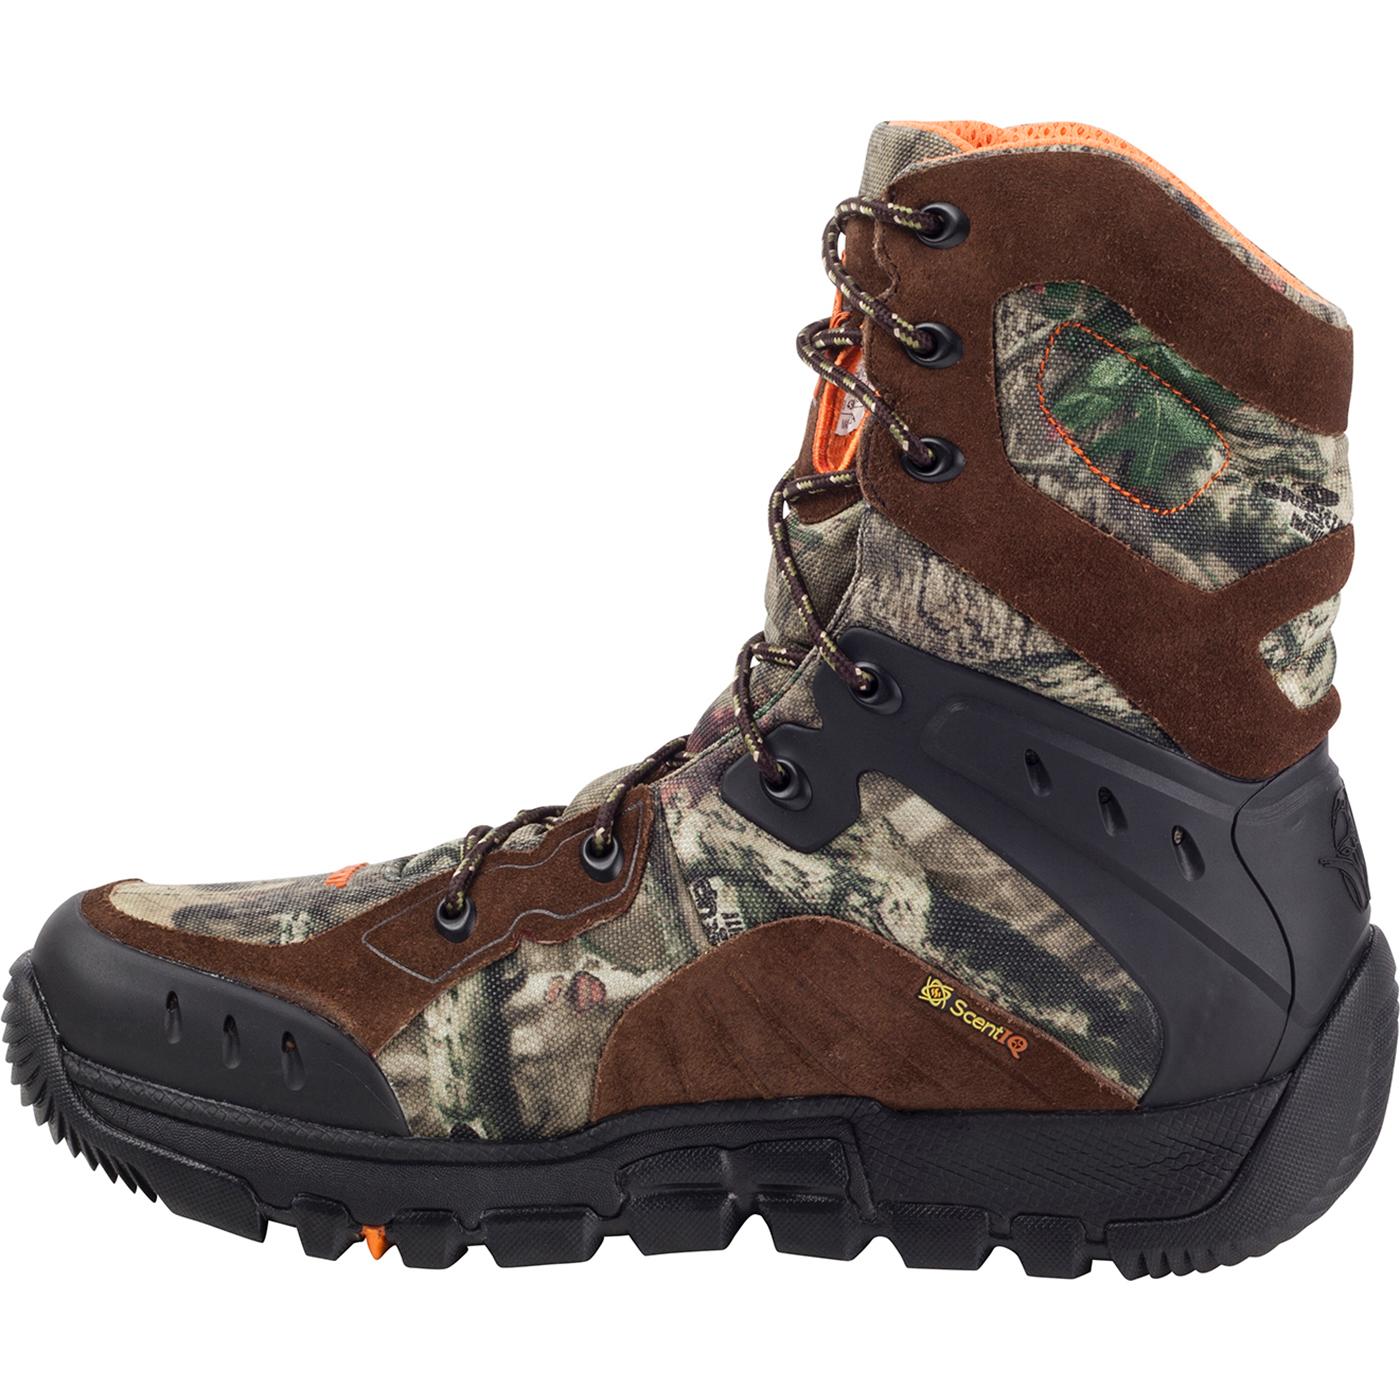 Rocky Athletic Mobility Midweight Level 2 Boots, #RO023